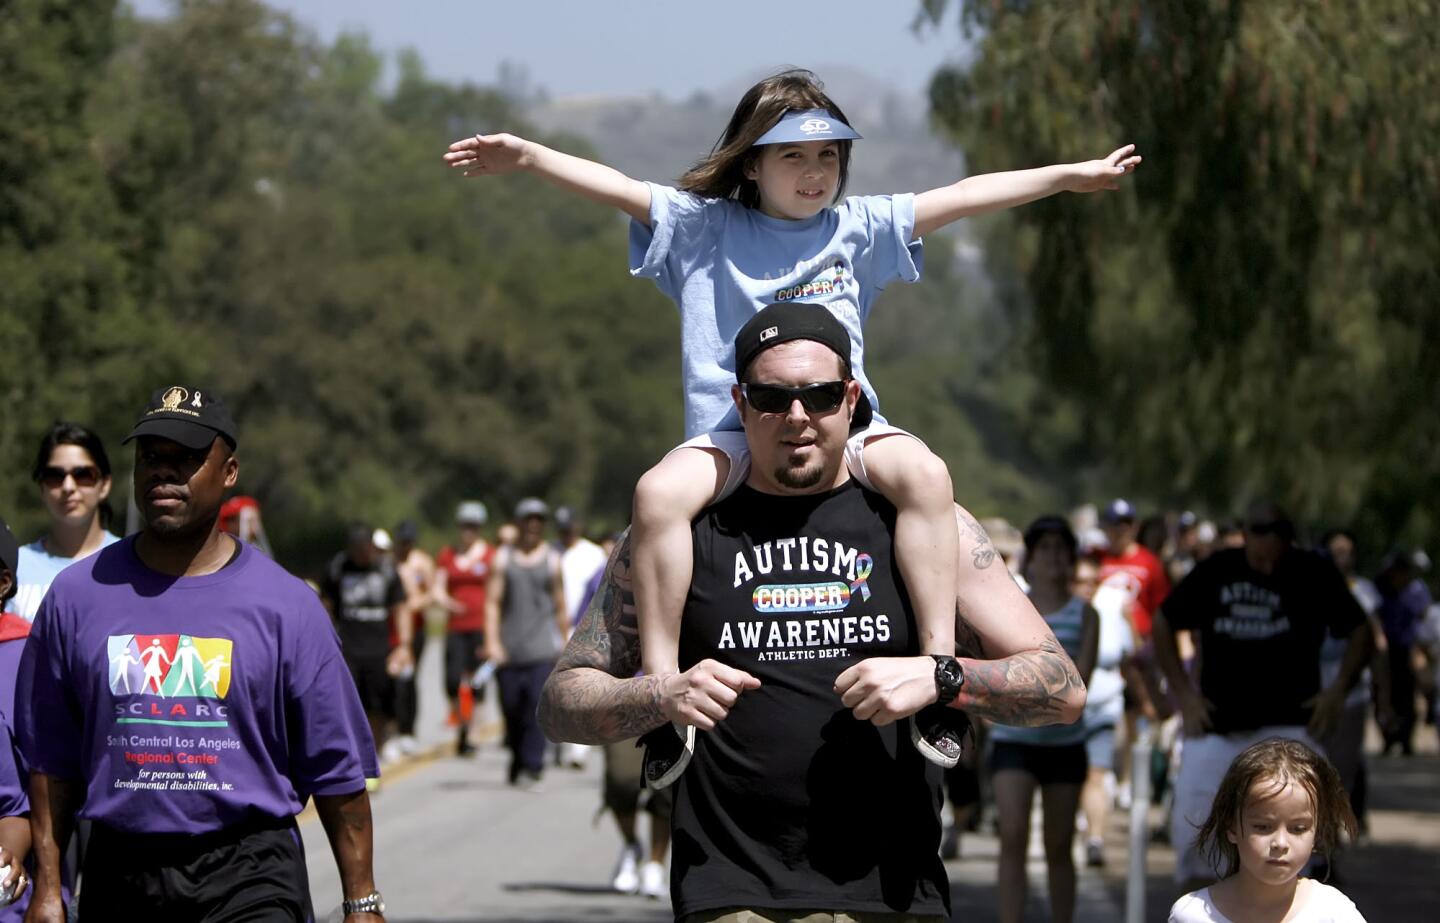 The L.A. Autism Walk was held around the Rose Bowl in Pasadena on Saturday, April 21, 2012.